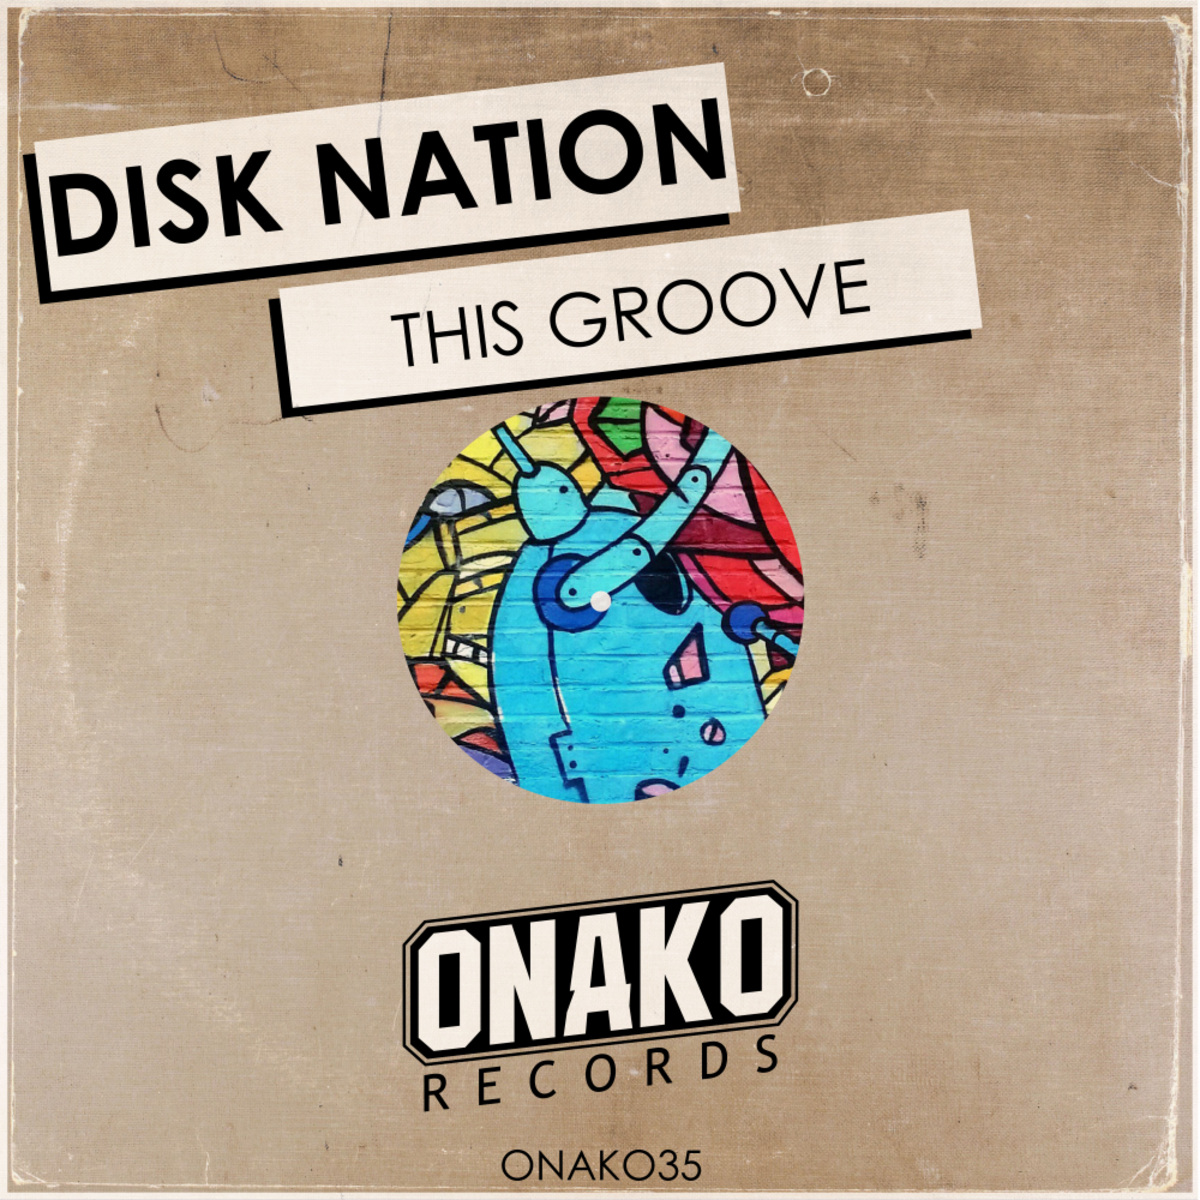 Disk nation - This Groove / Onako Records